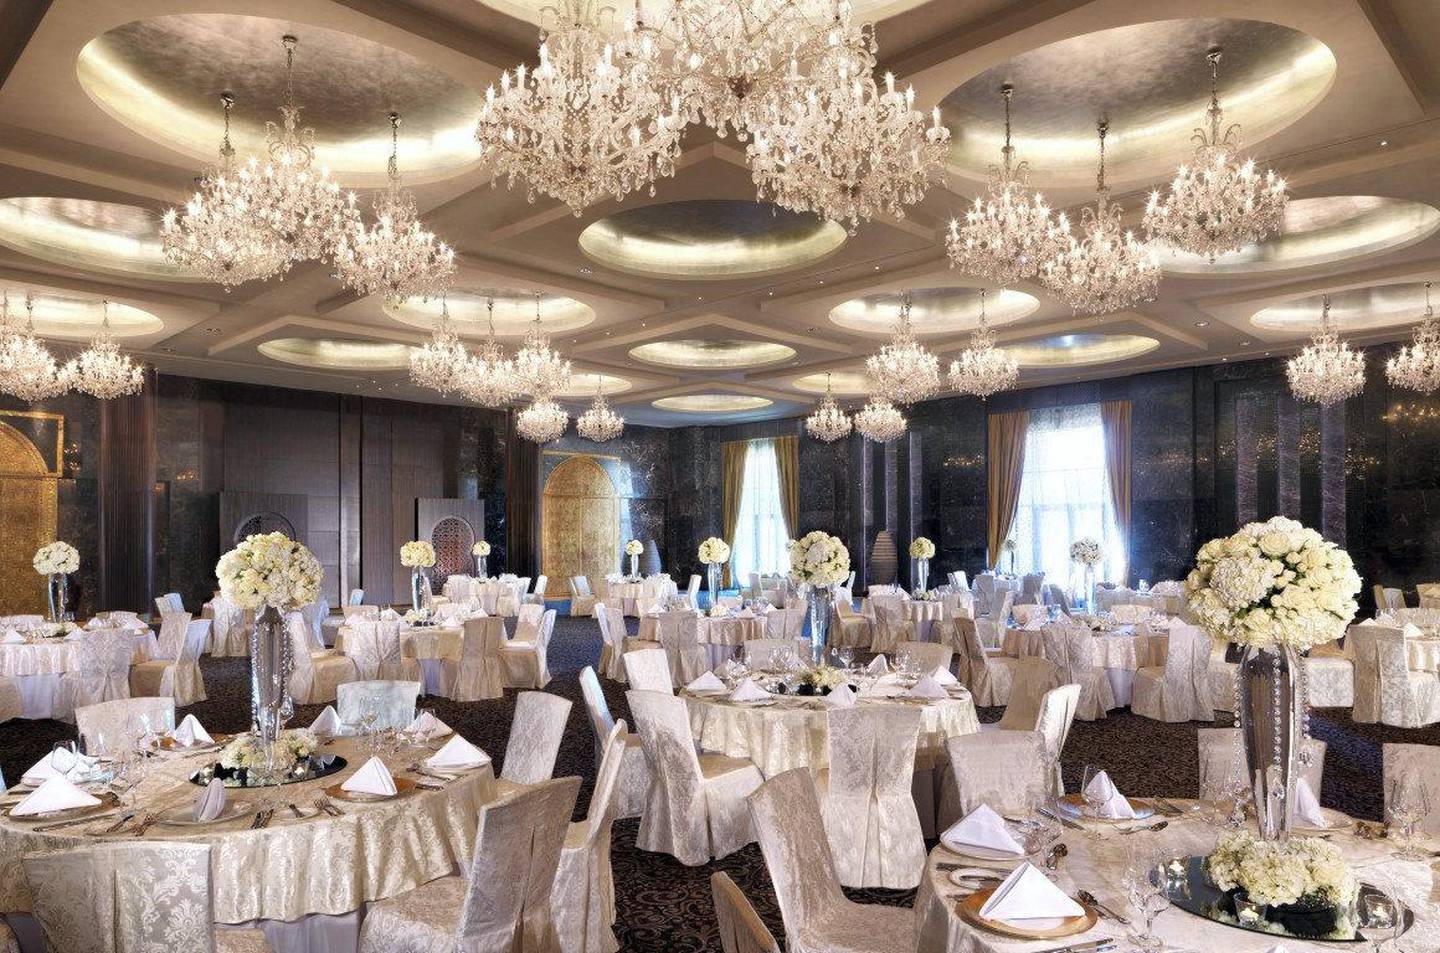 The majority of weddings booked in the Raffles Dubai hotel for 2020 have been shifted to 2021